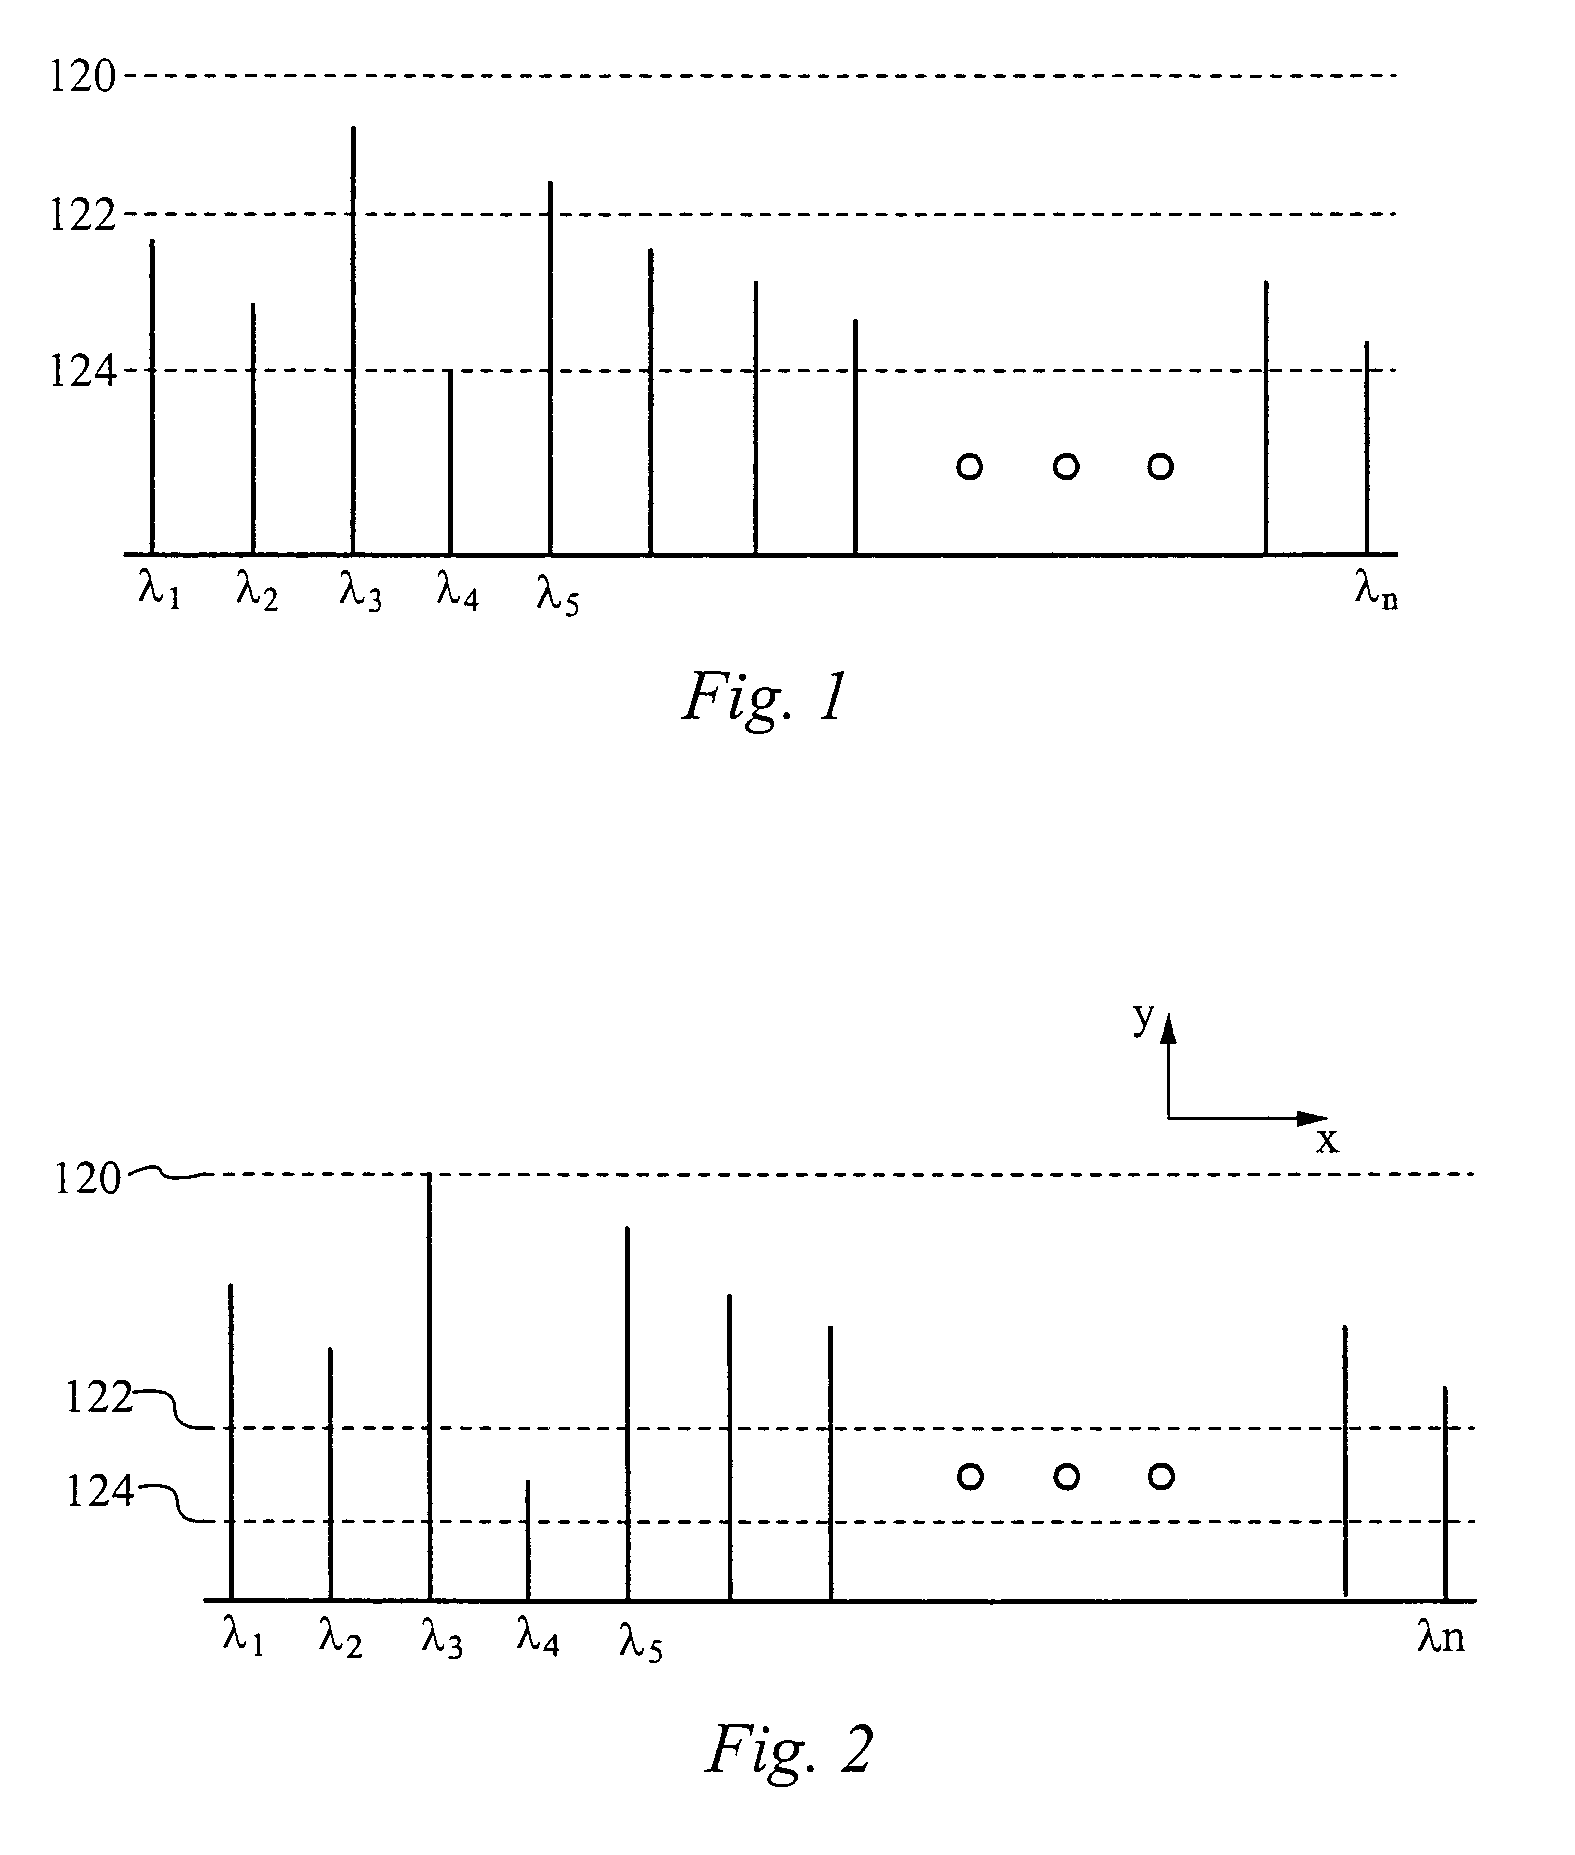 Diffractive light modulator-based dynamic equalizer with integrated spectral monitor